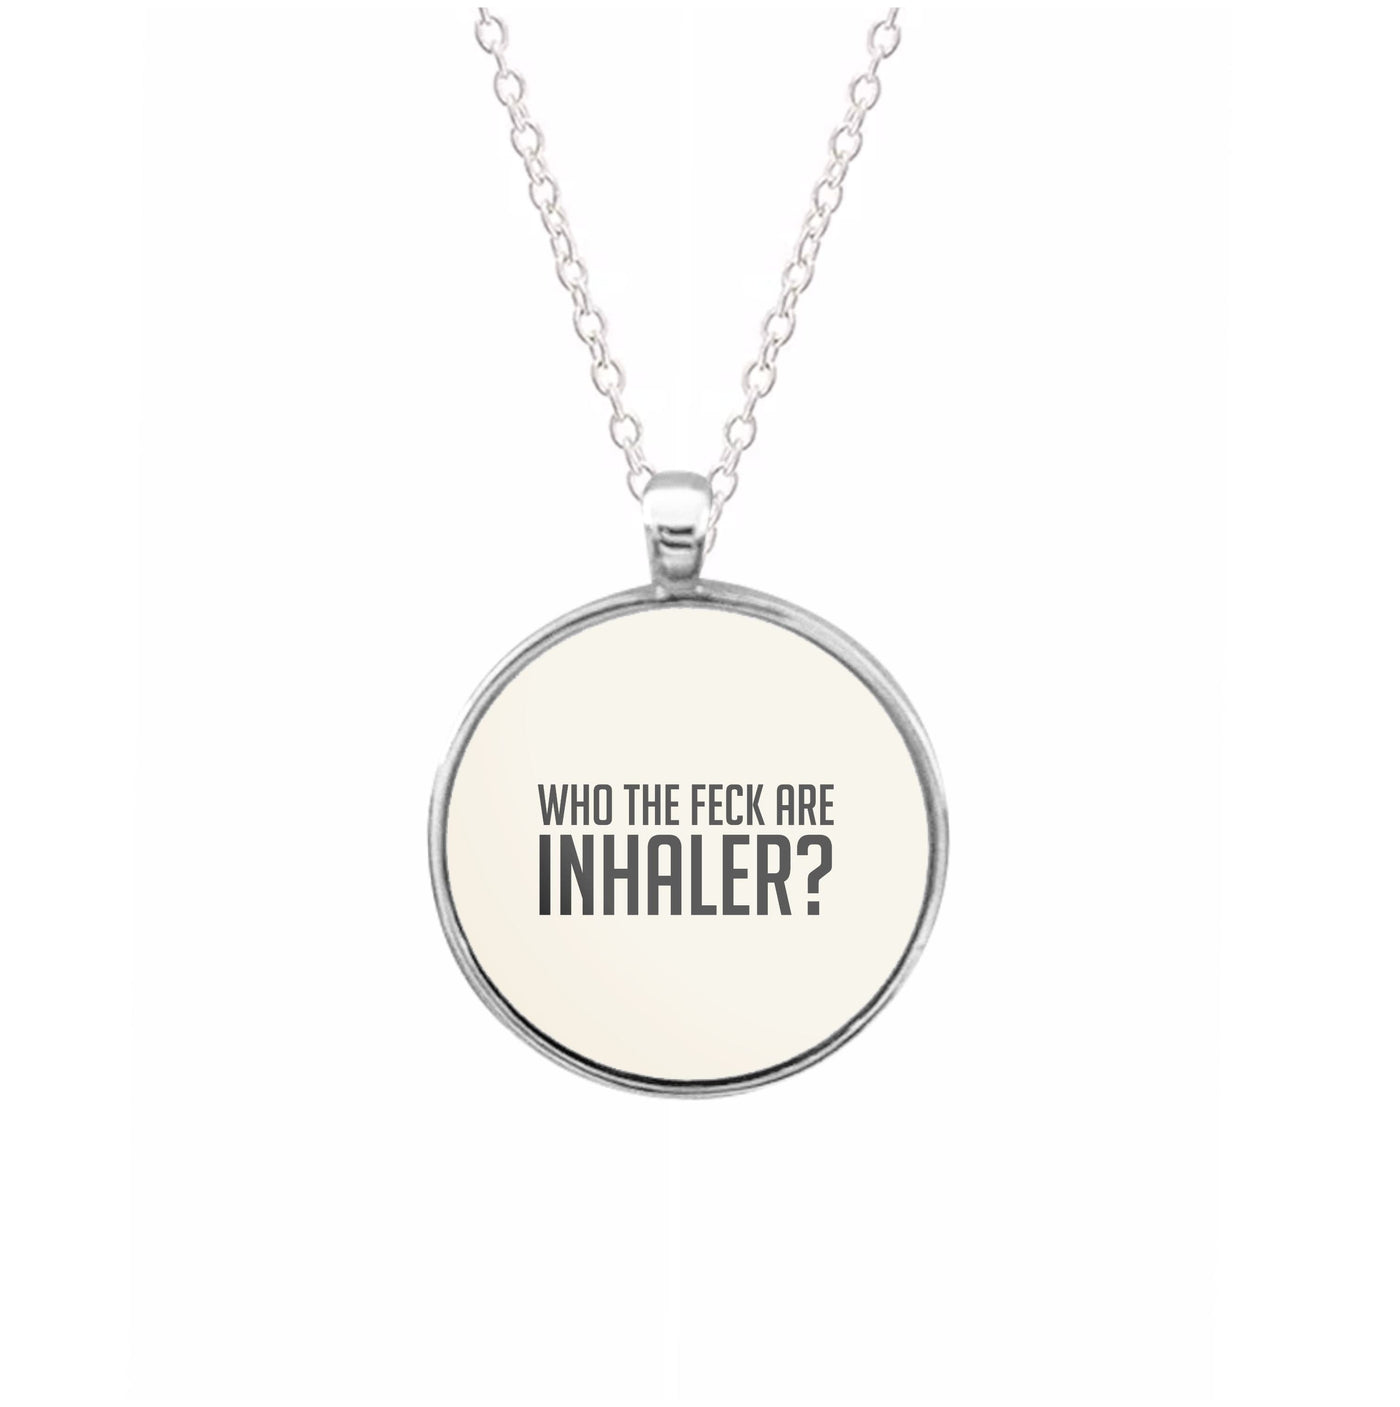 Who The Feck Are Inhaler? Necklace